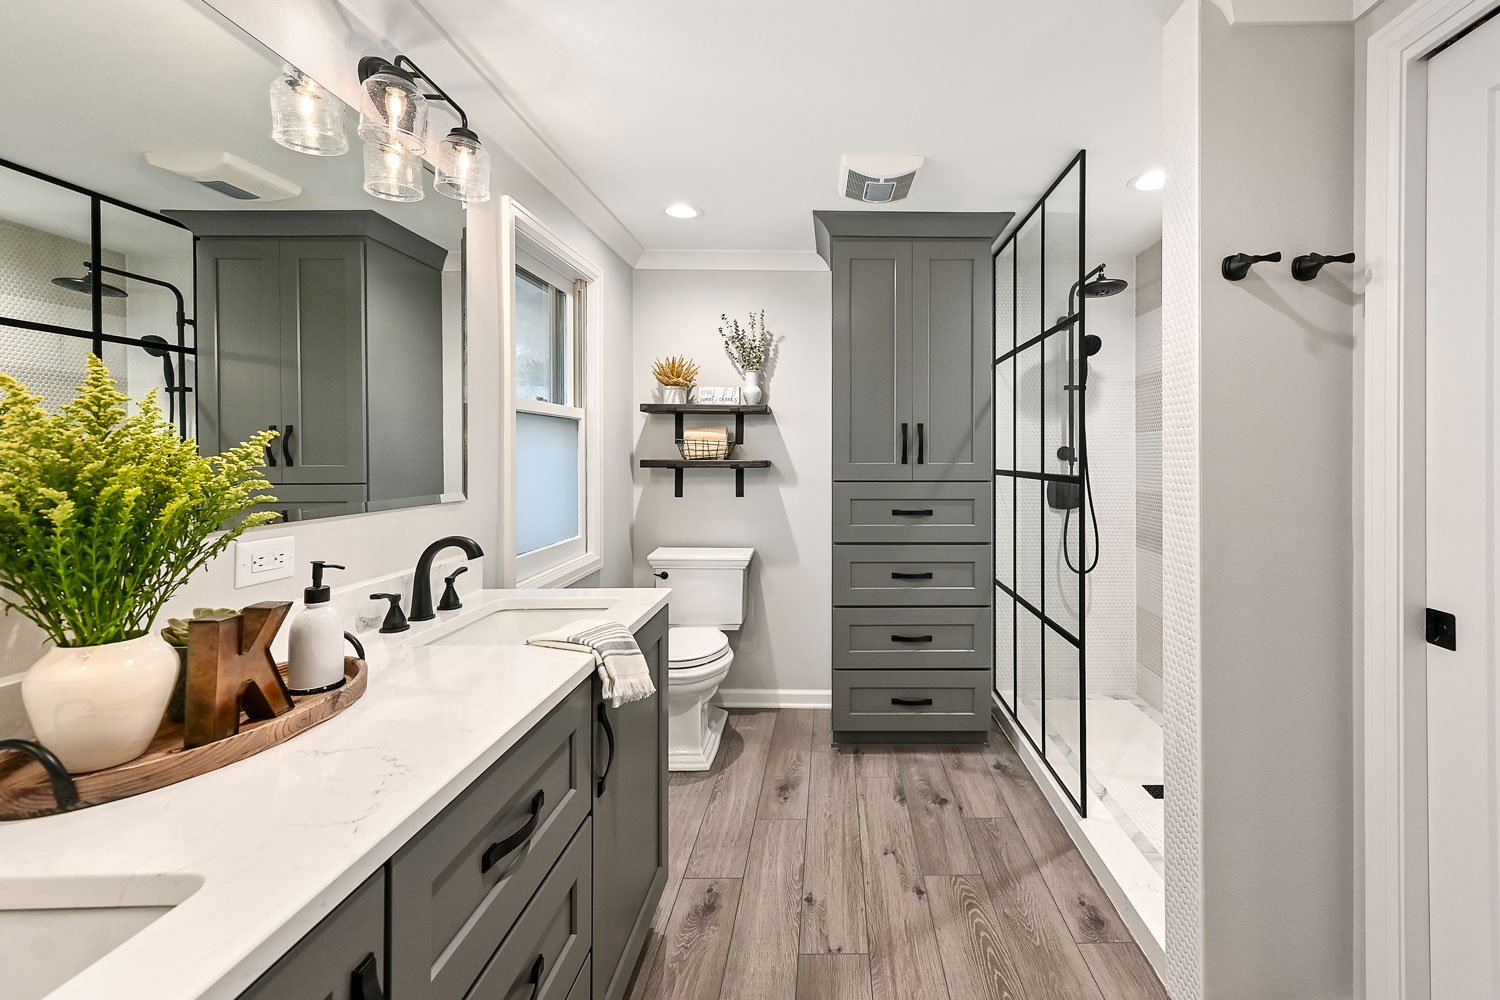 Choose great features for your master bath 